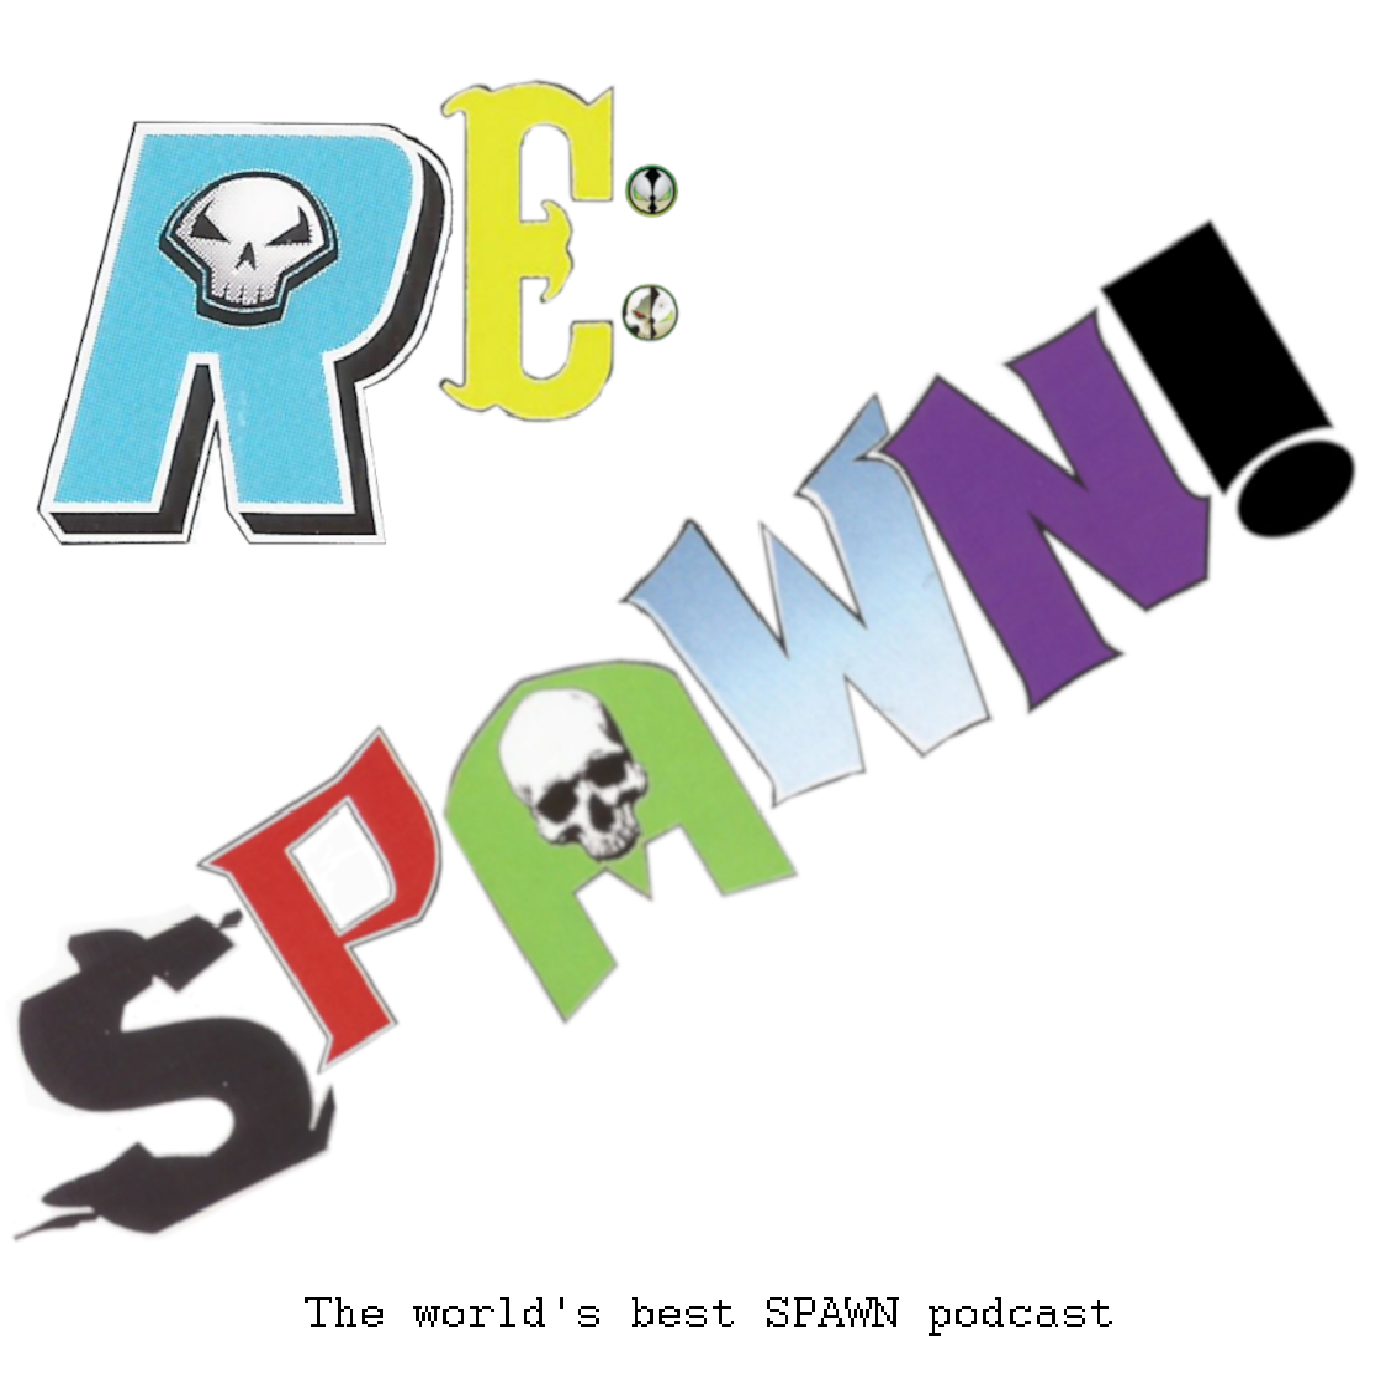 Episode 81 - Spawn 14 and Spawn 348